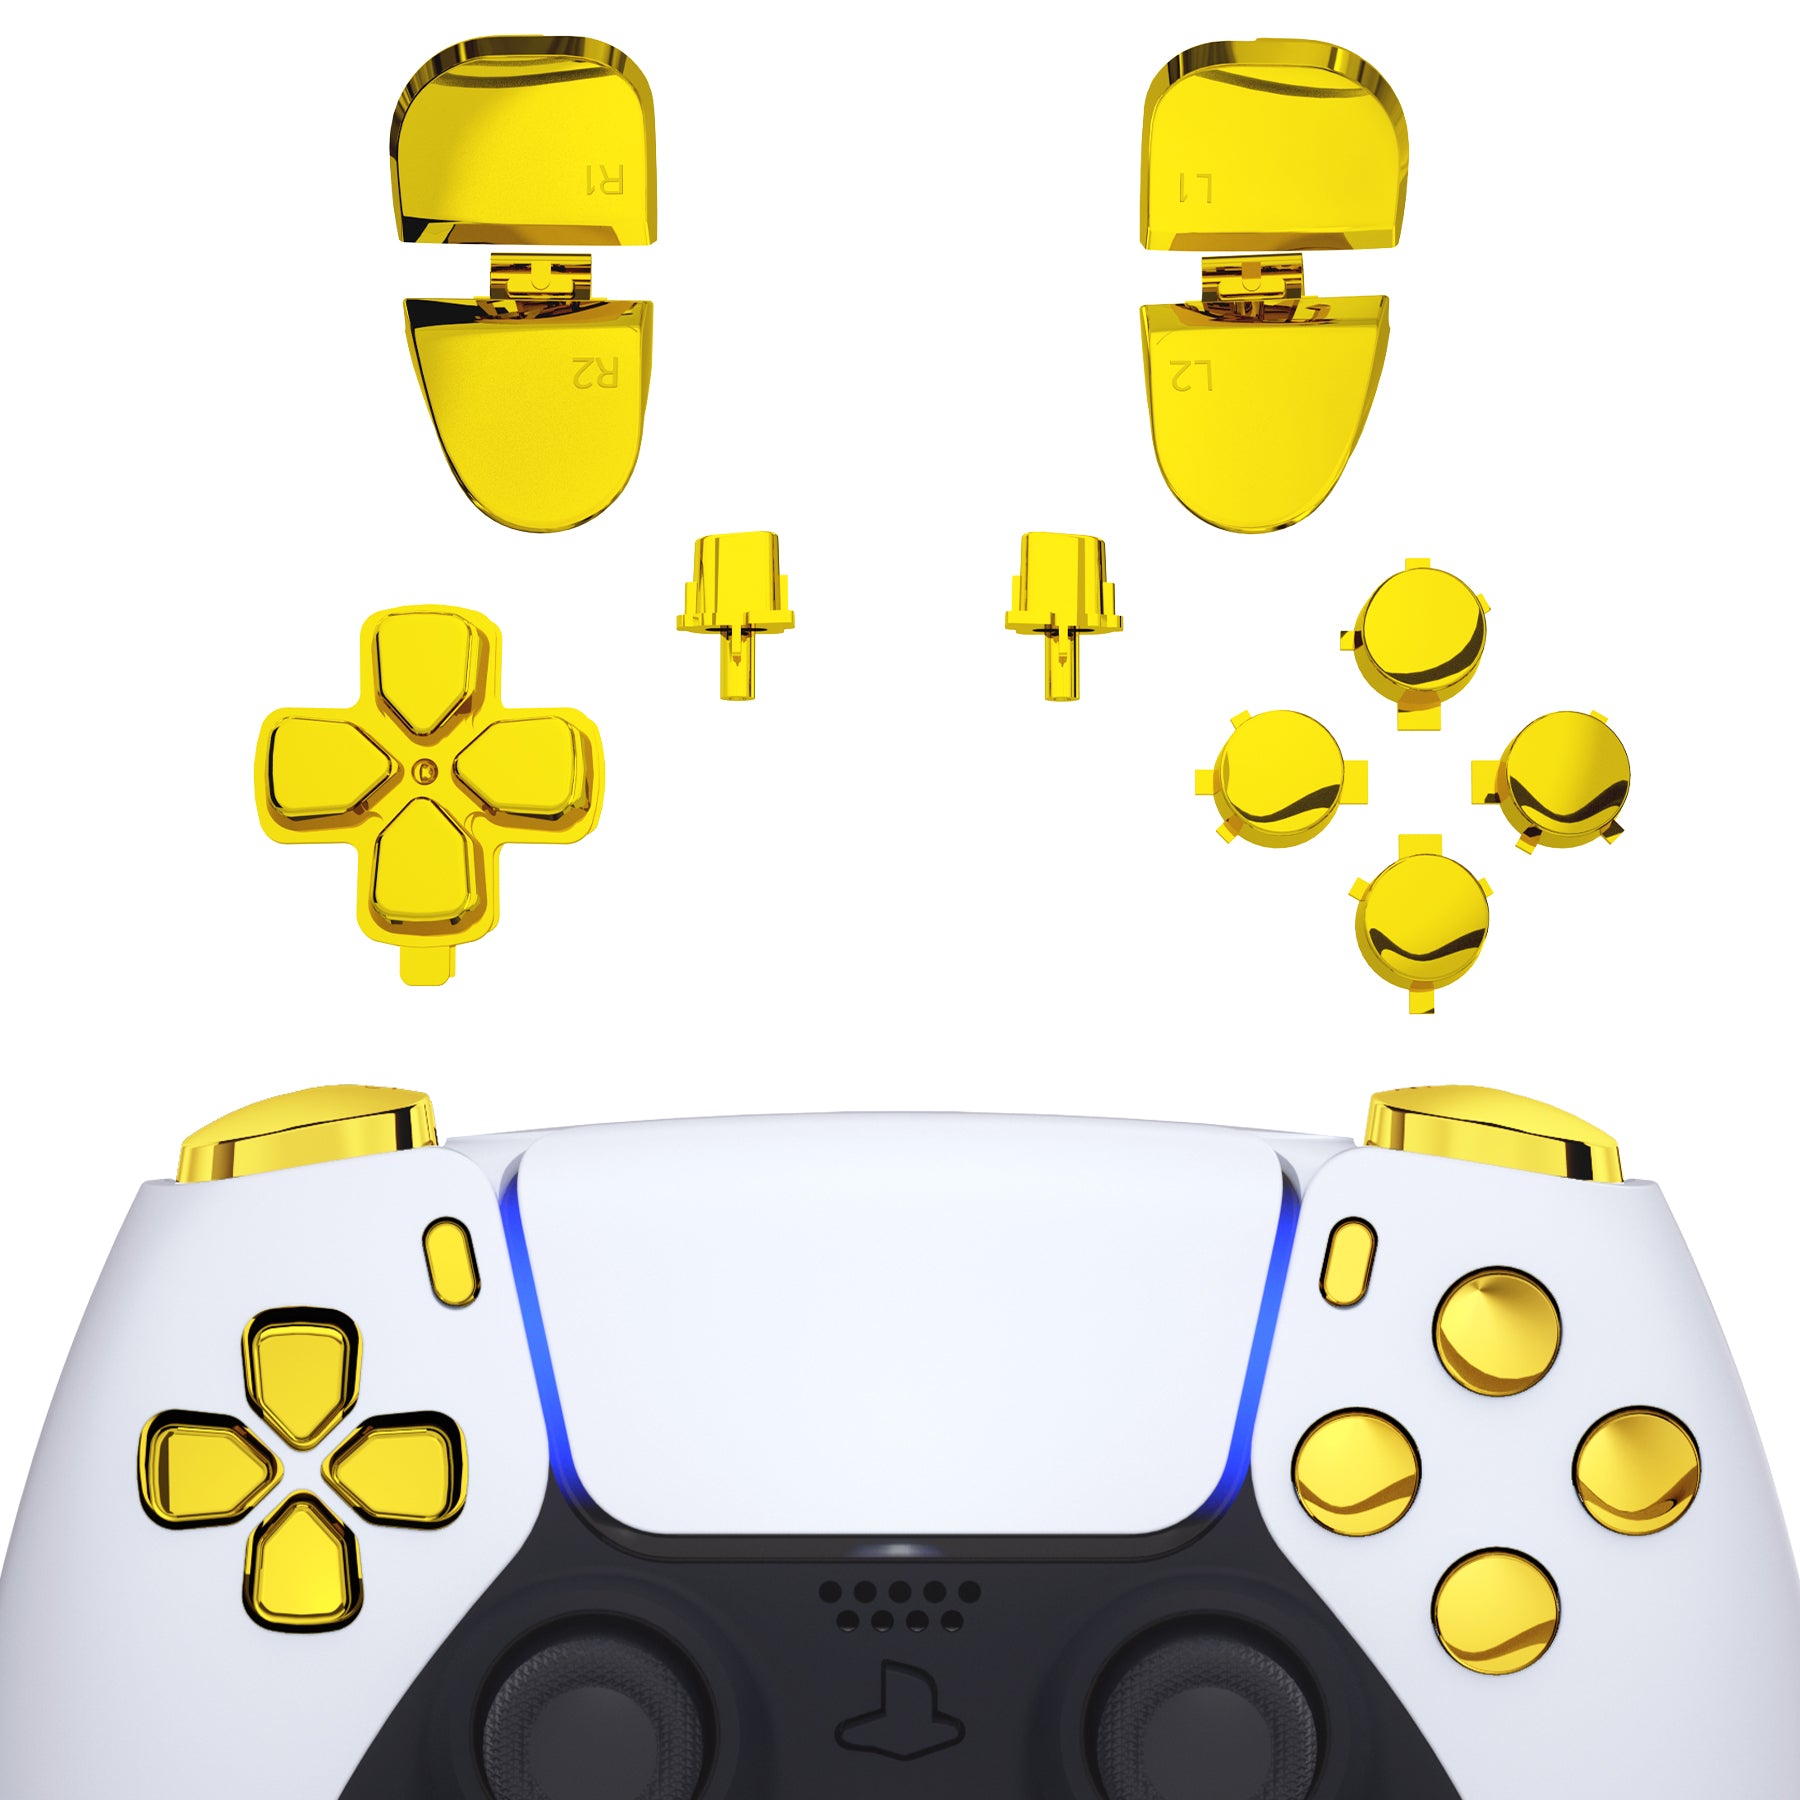 eXtremeRate Retail Replacement D-pad R1 L1 R2 L2 Triggers Share Options Face Buttons, Chrome Gold Full Set Buttons Compatible with ps5 Controller BDM-030 - JPF2001G3